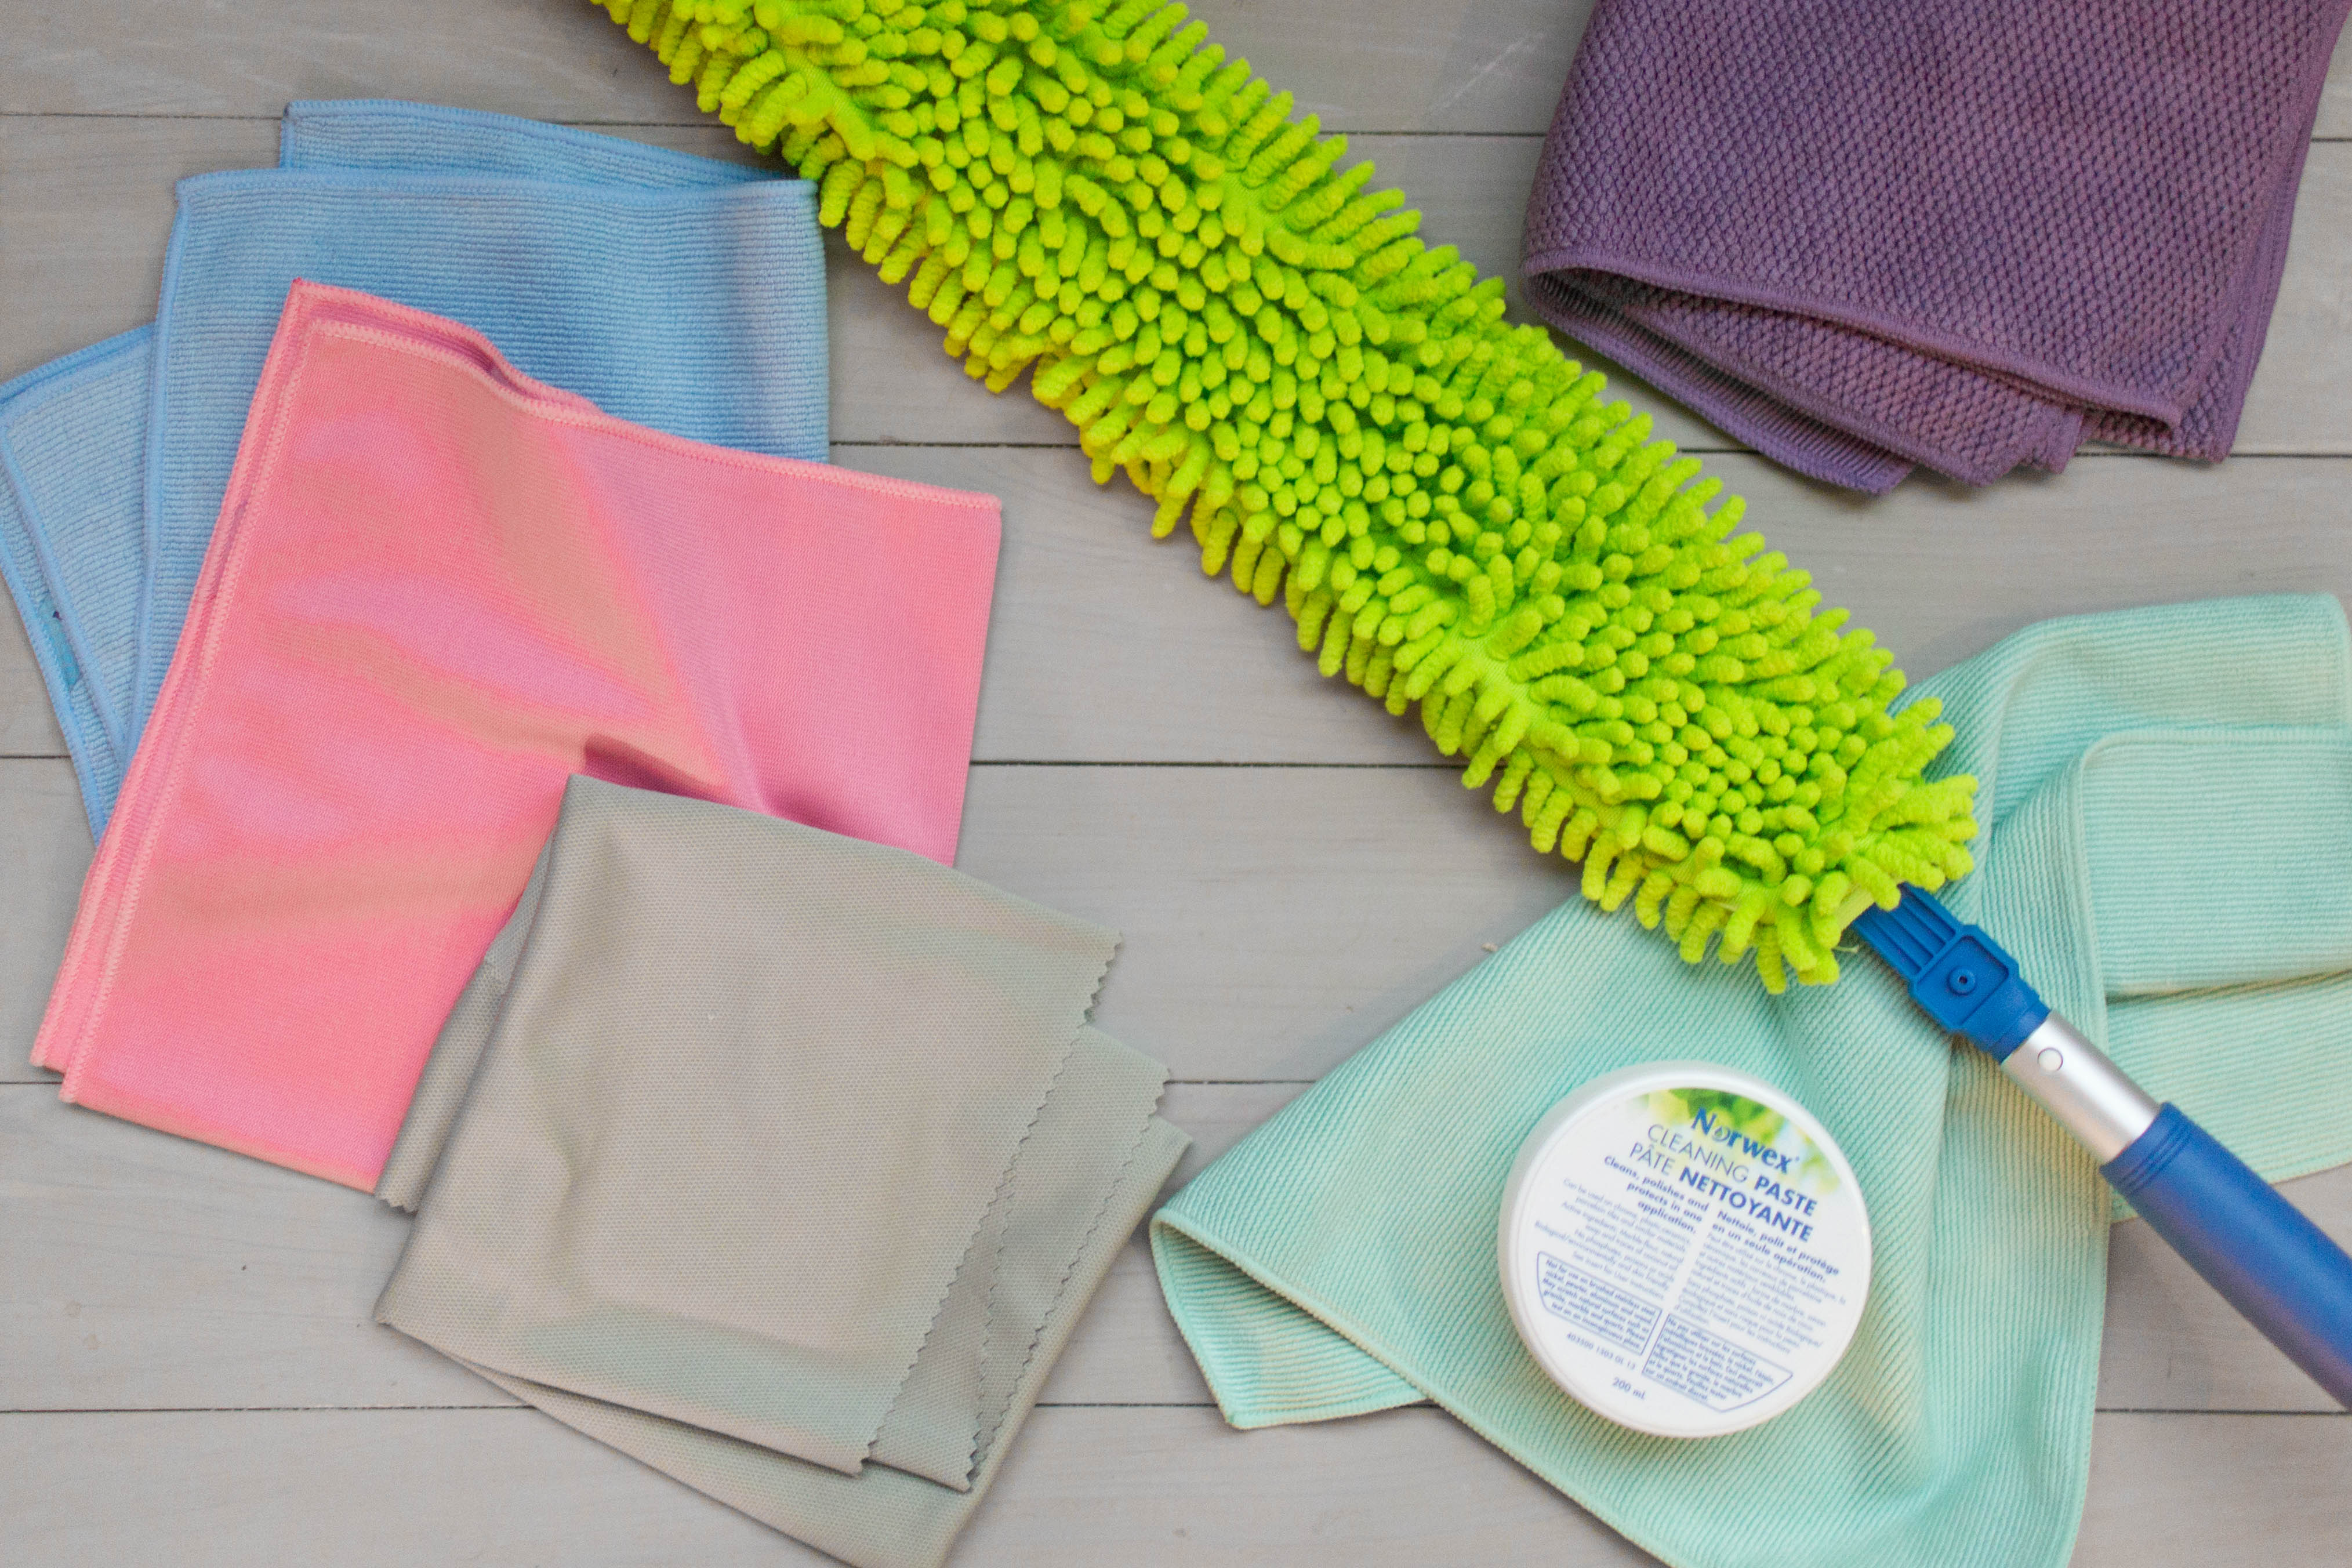 Looking for an easy way to enjoy chemical free cleaning? Then you'll LOVE Norwex. Here's my honest review after 5 months of using it in my home. | read more at happilythehicks.com